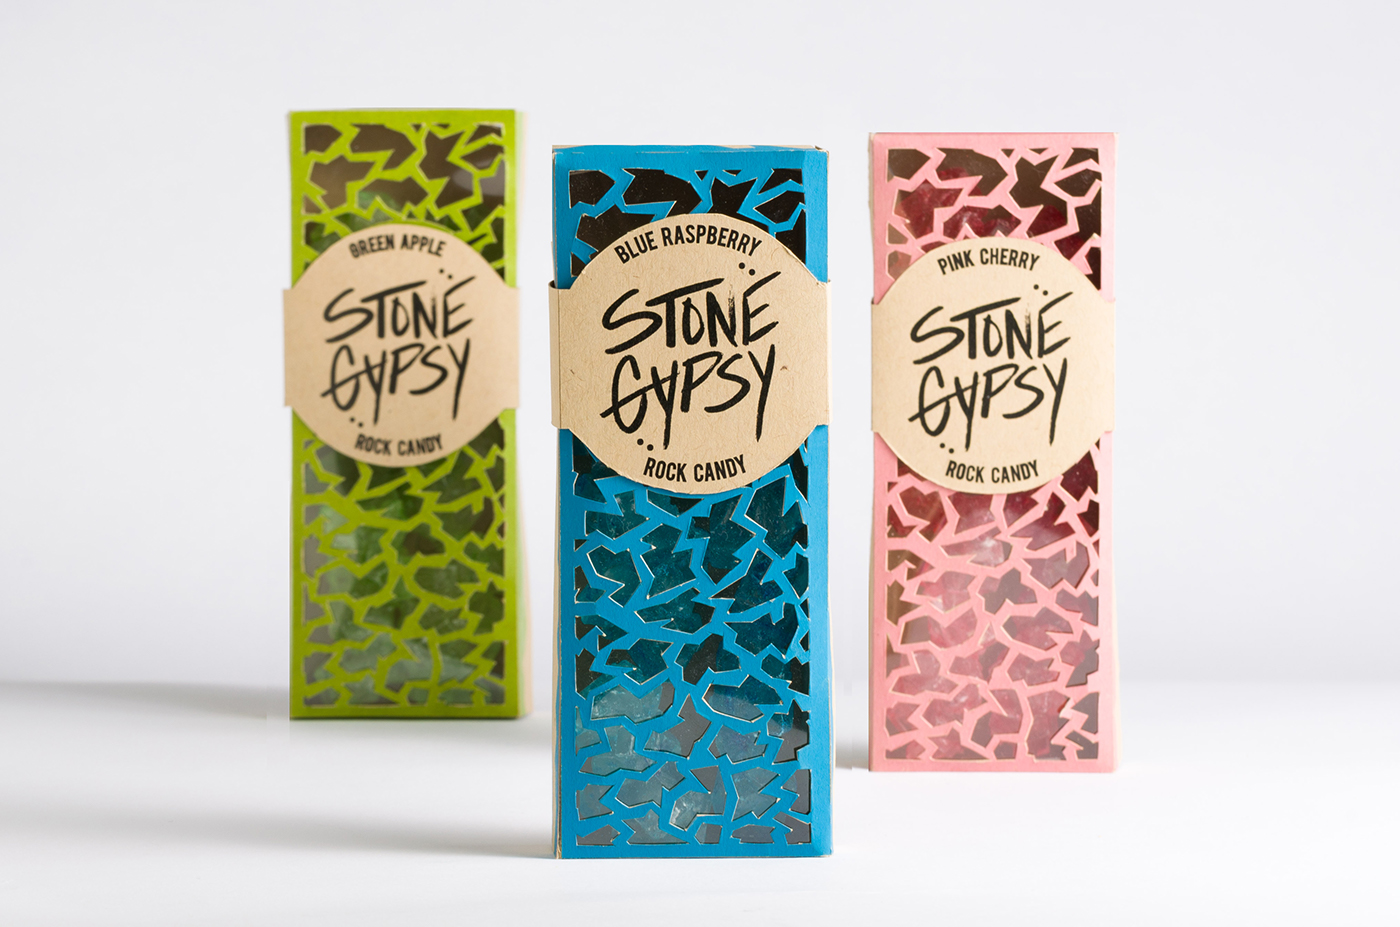 Rock Candy gypsy stone Stone Gypsy package design  candy packaging die cut Green Packaging recyclable